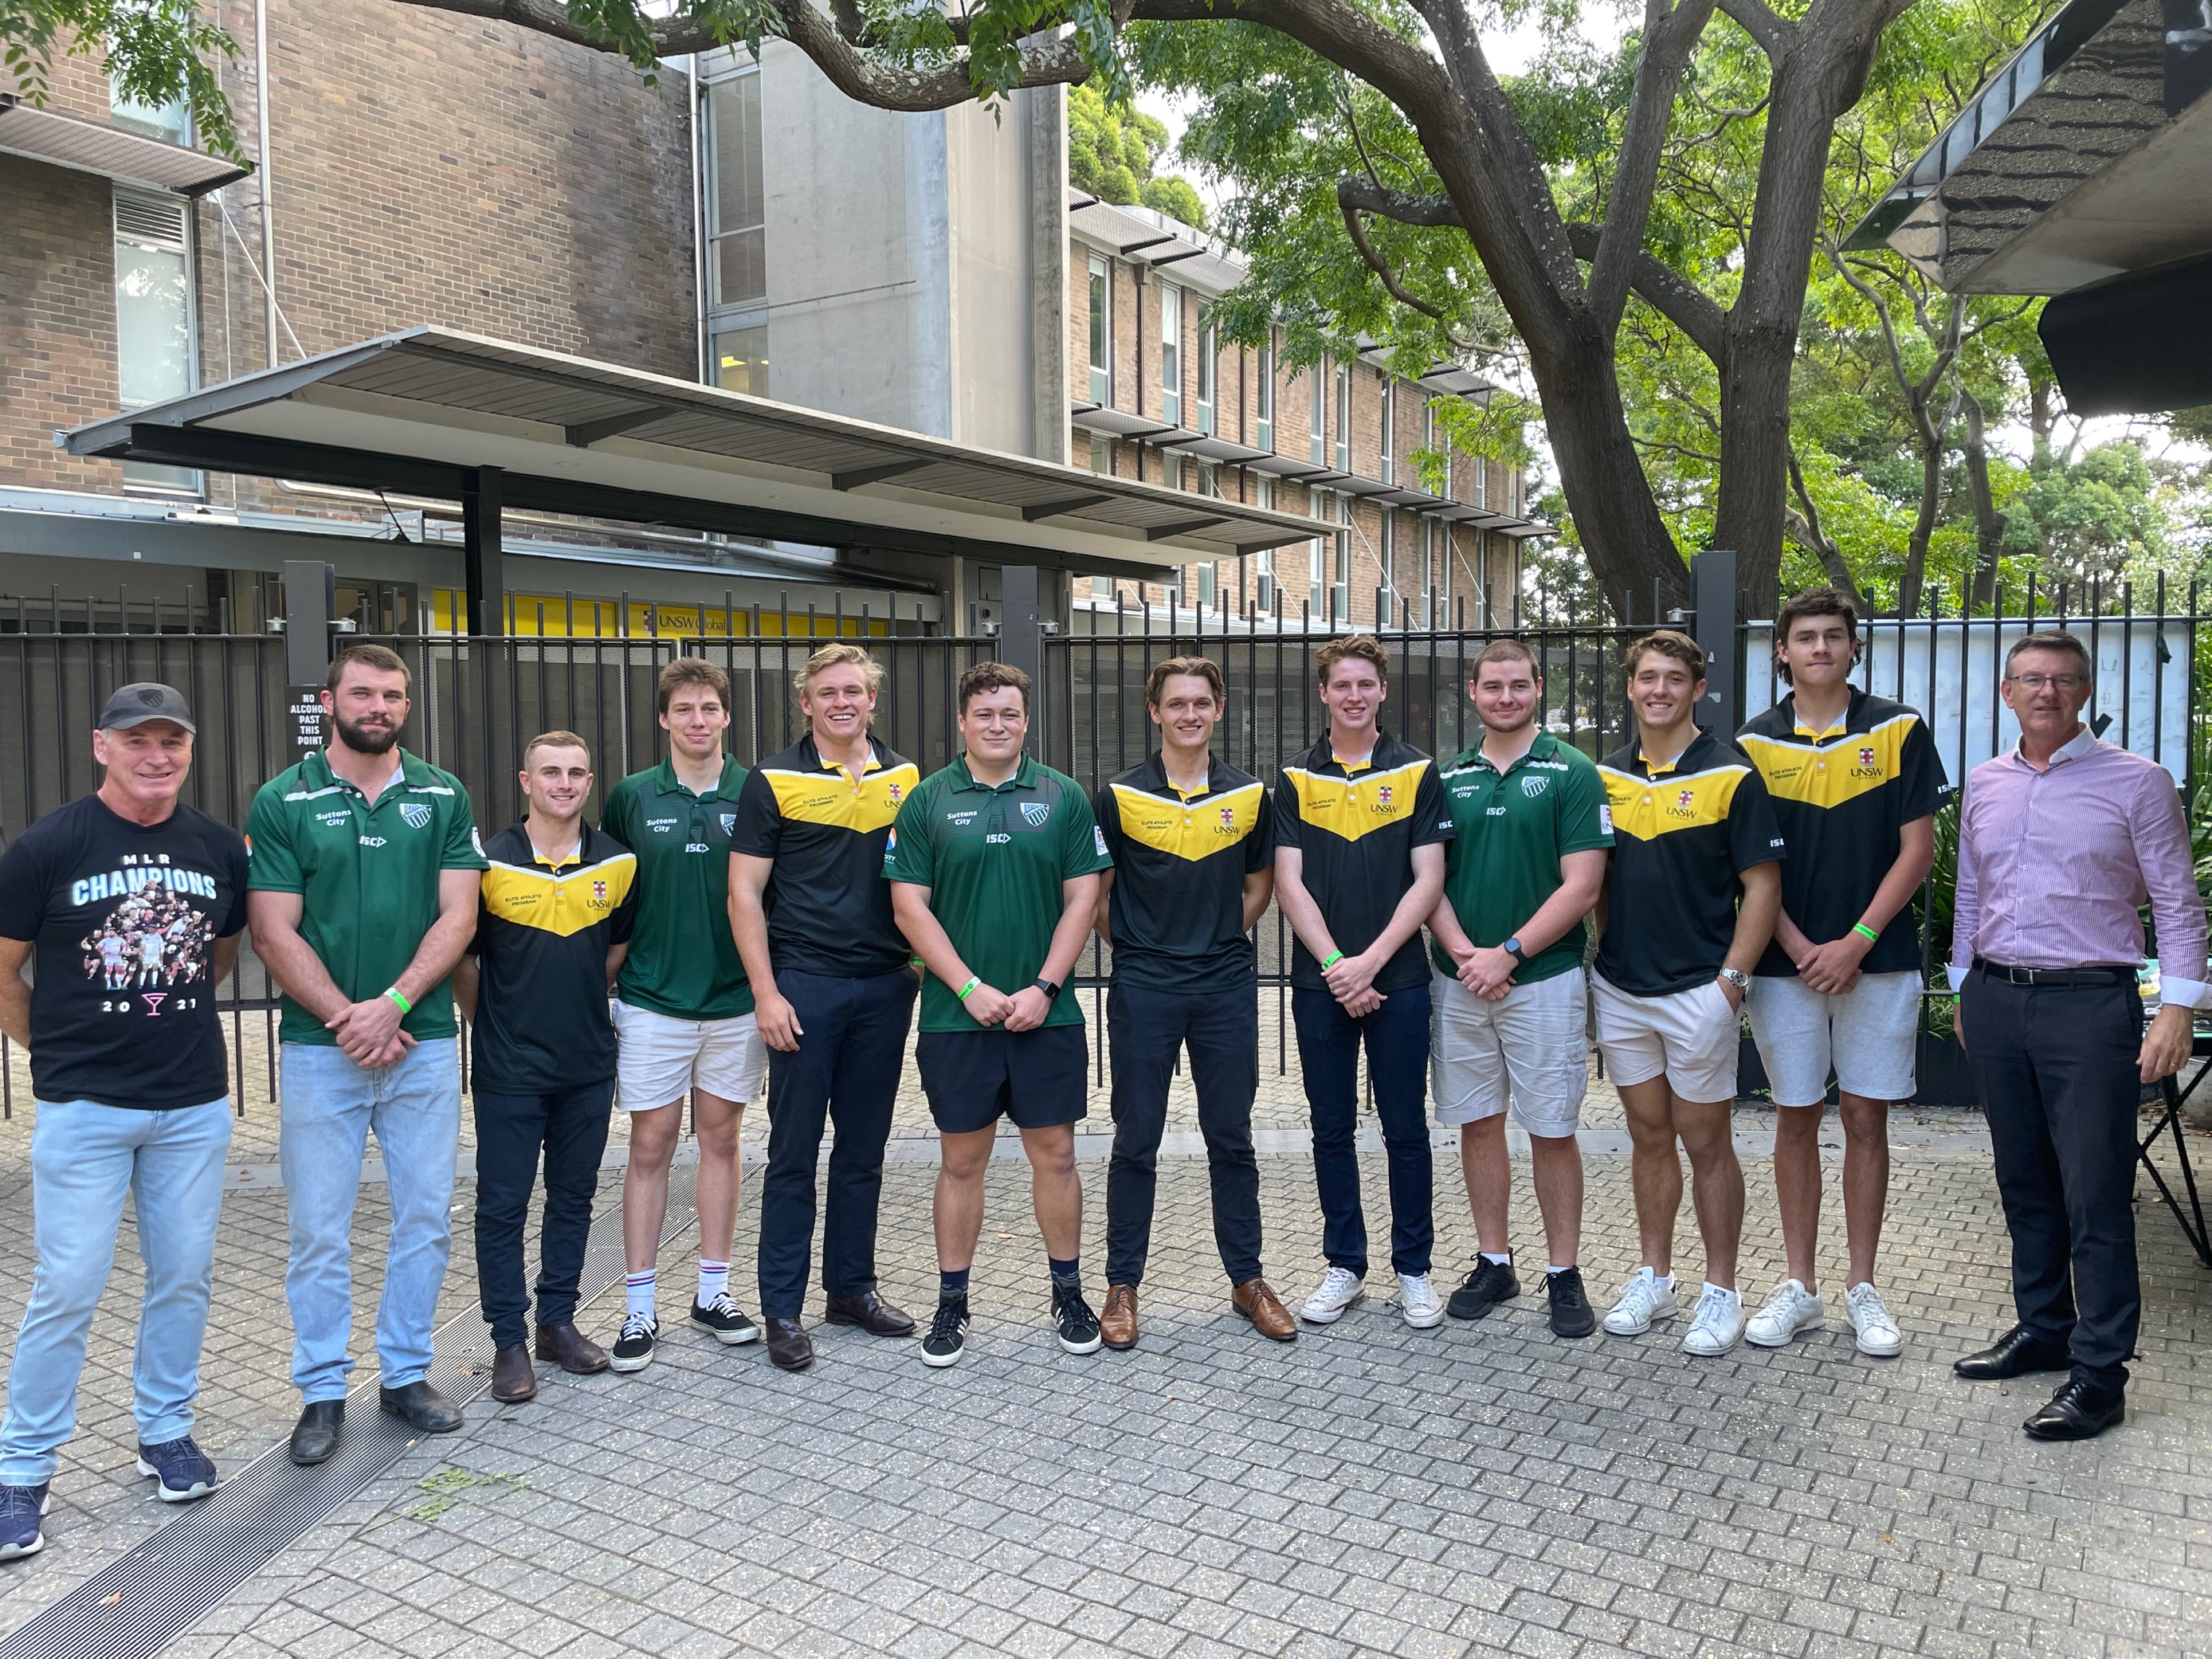 UNSW welcome event for Randwick Rugby scholars at The Roundhouse.